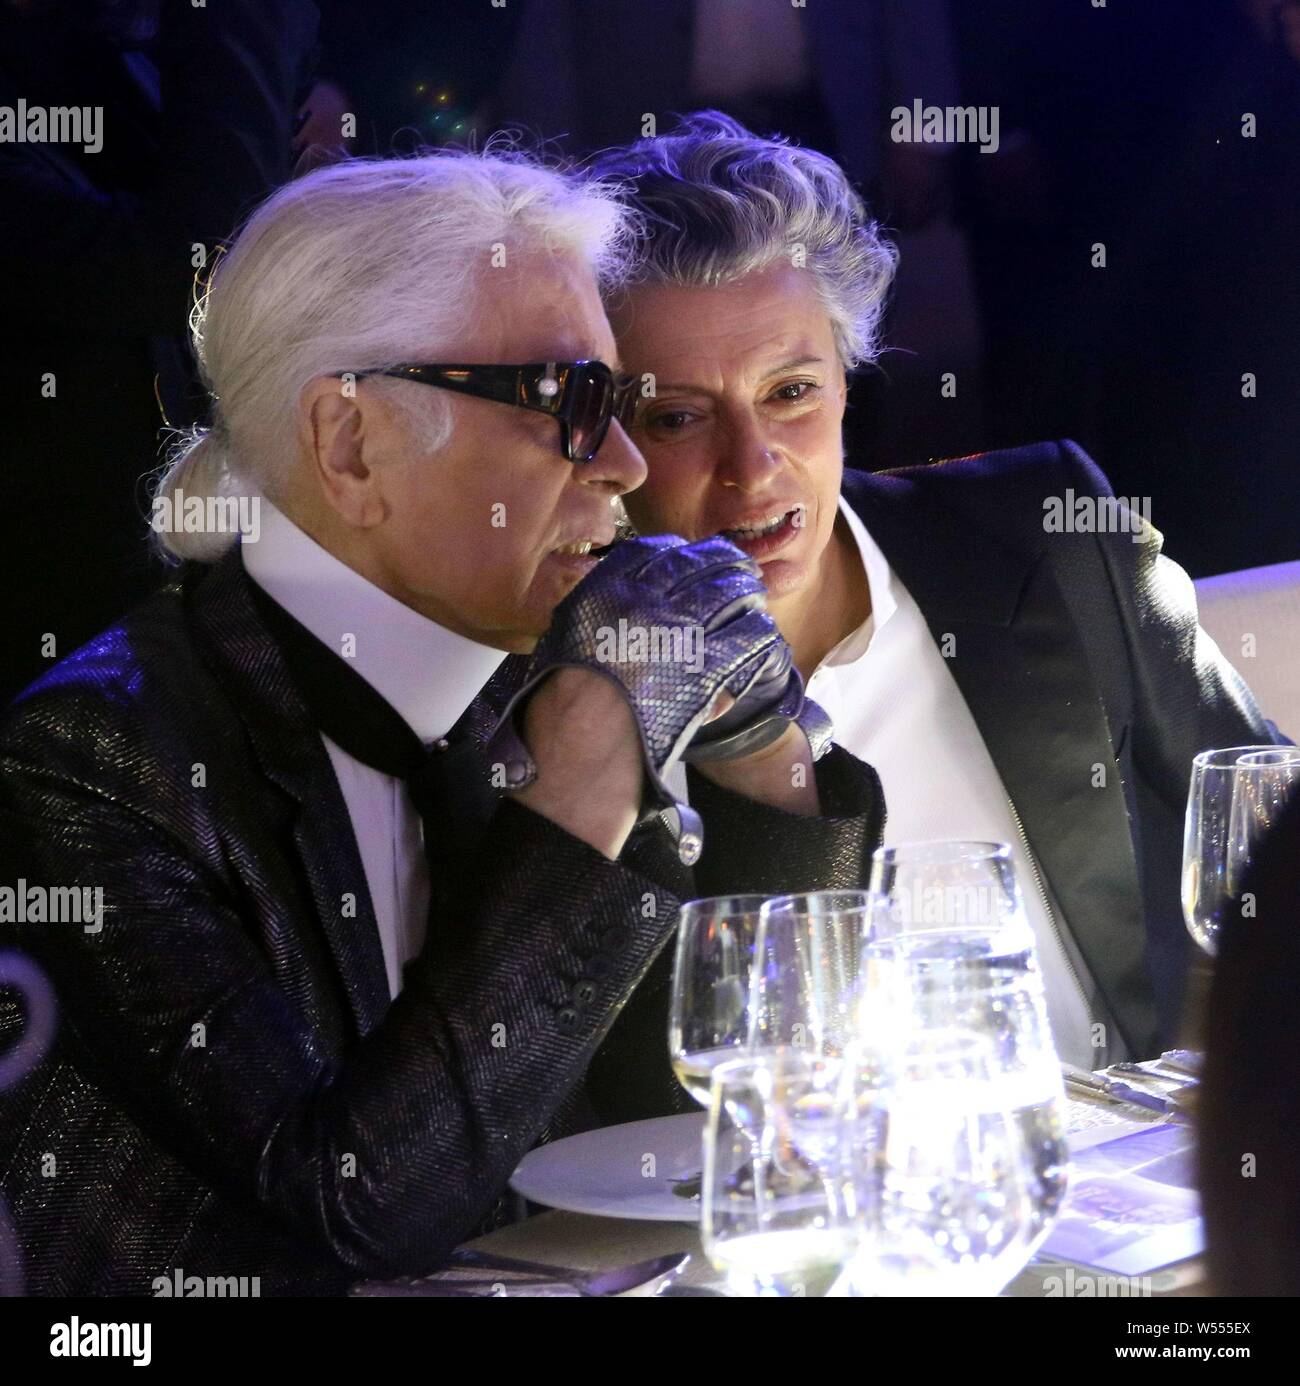 Karl Lagerfeld Artwork for Sale at Online Auction